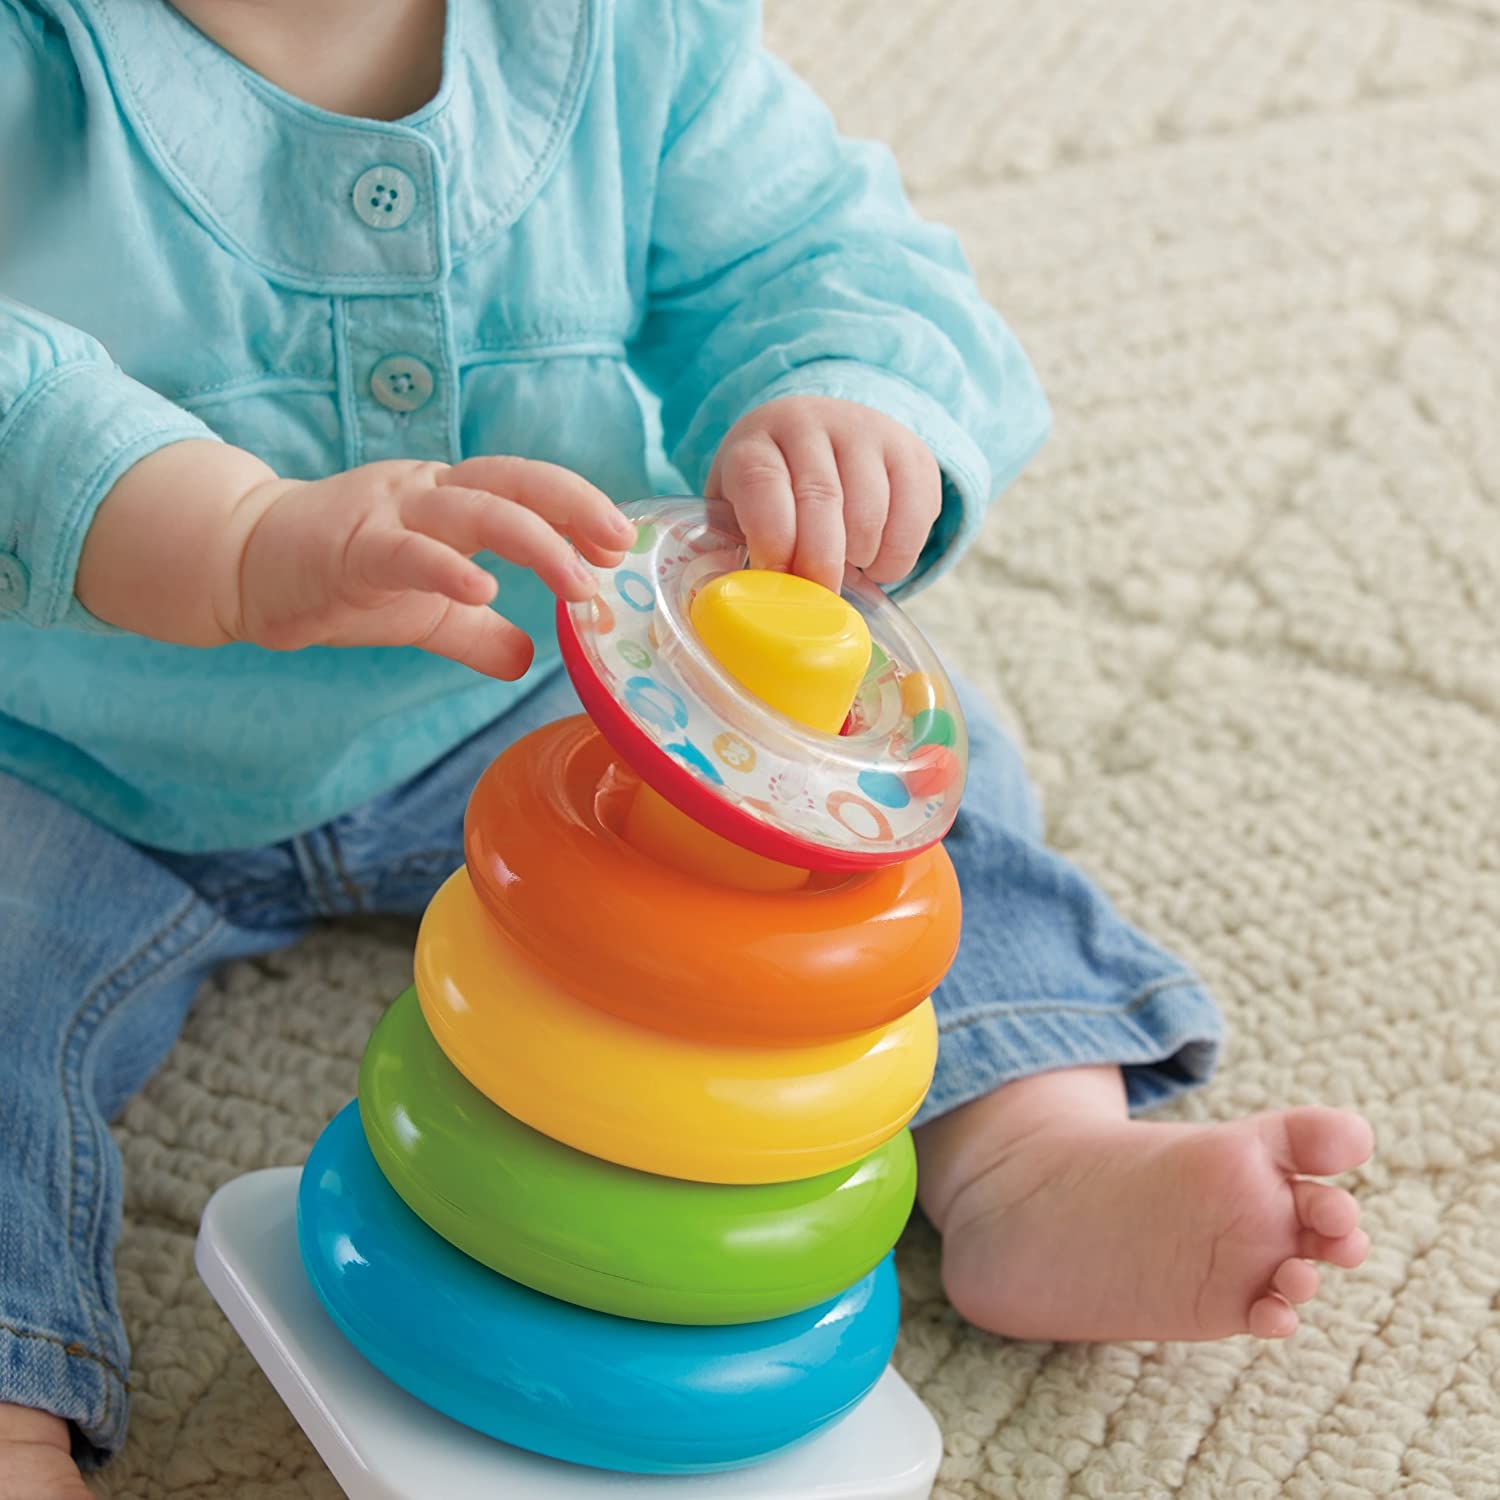 Fisher-Price Rock-a-Stack and Baby's First Blocks Bundle - with 10 Colorful Blocks & A Take-Along Storage Bucket